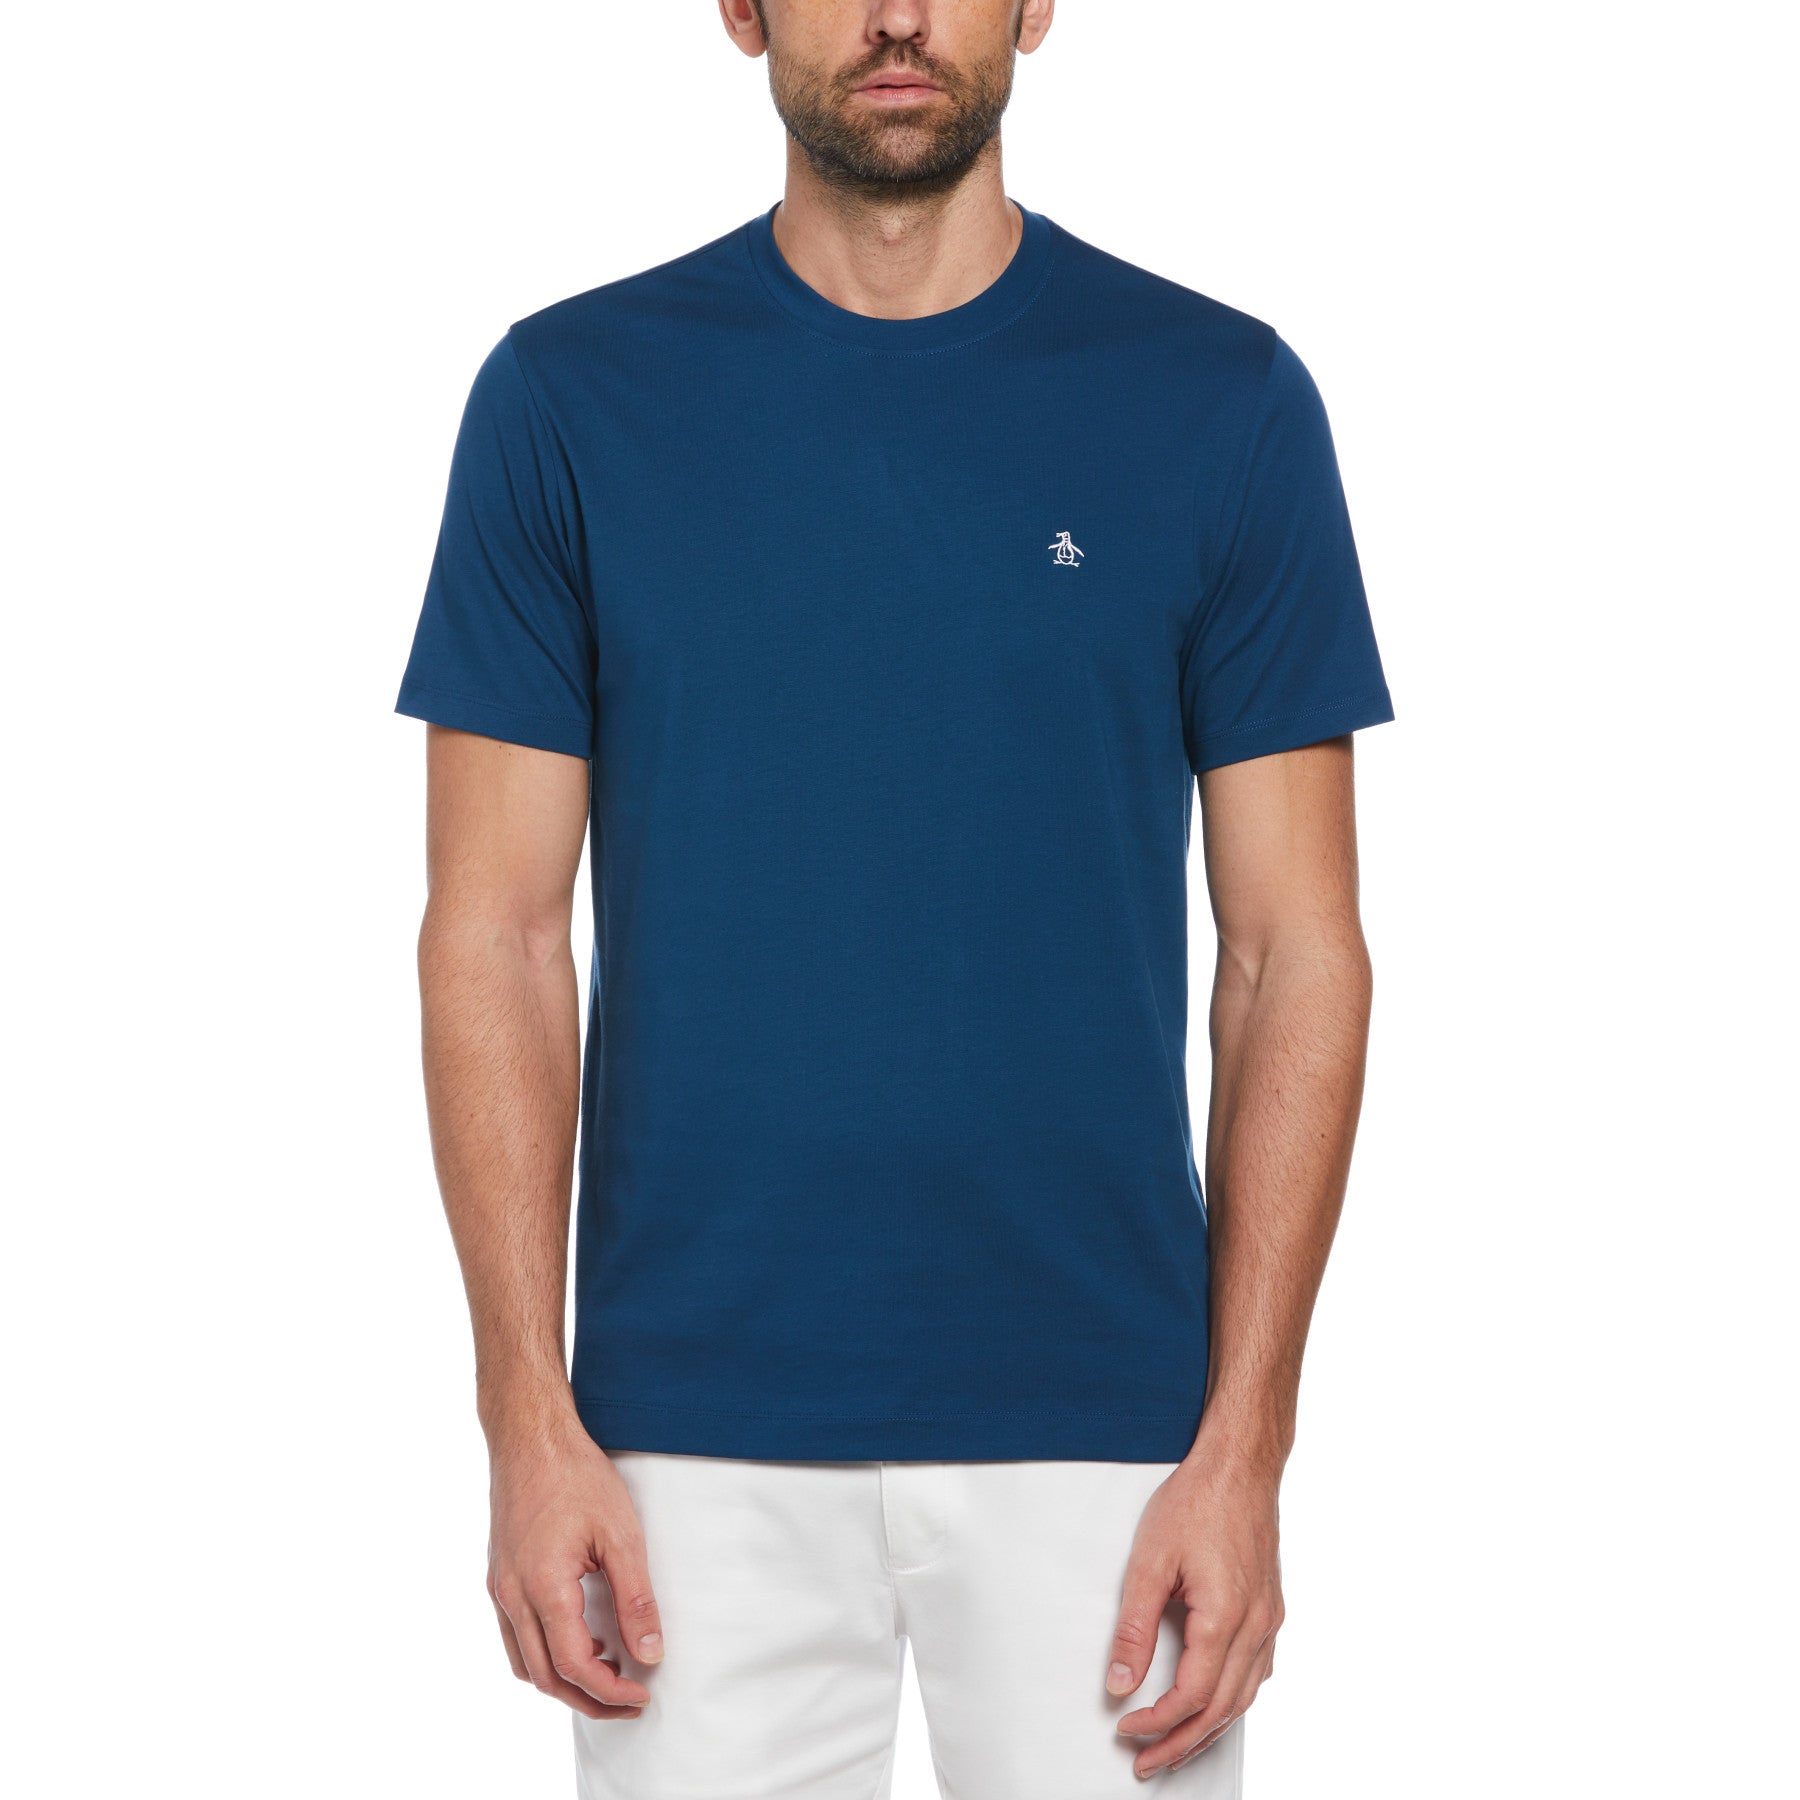 View Pin Point Embroidered Logo Organic Cotton TShirt In Poseidon Blue information